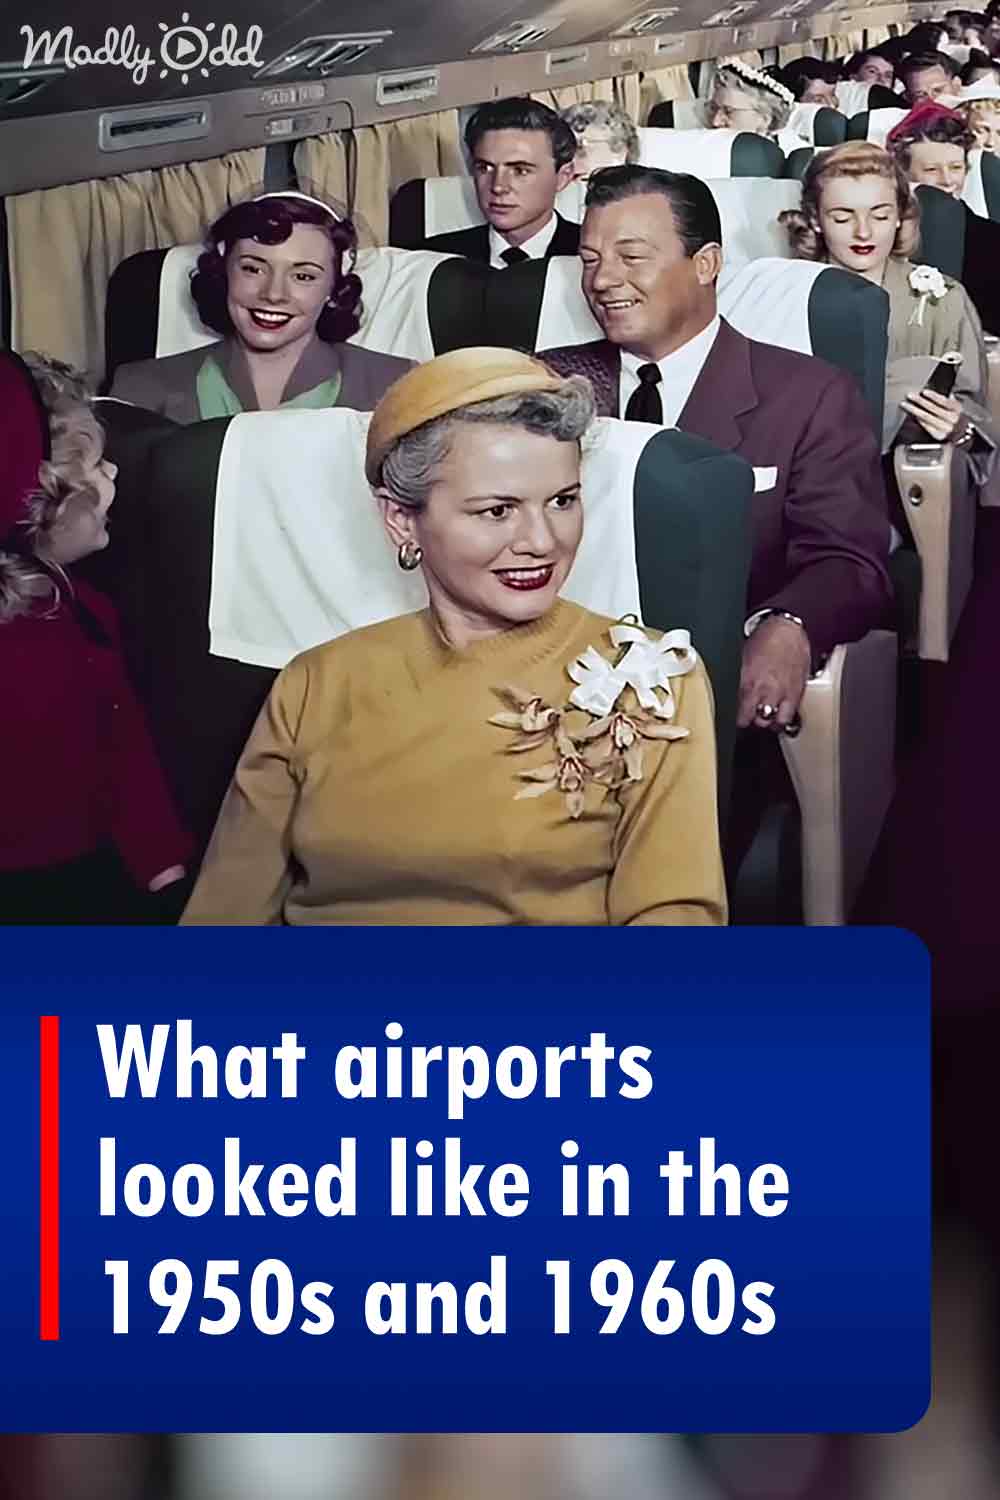 What airports looked like in the 1950s and 1960s